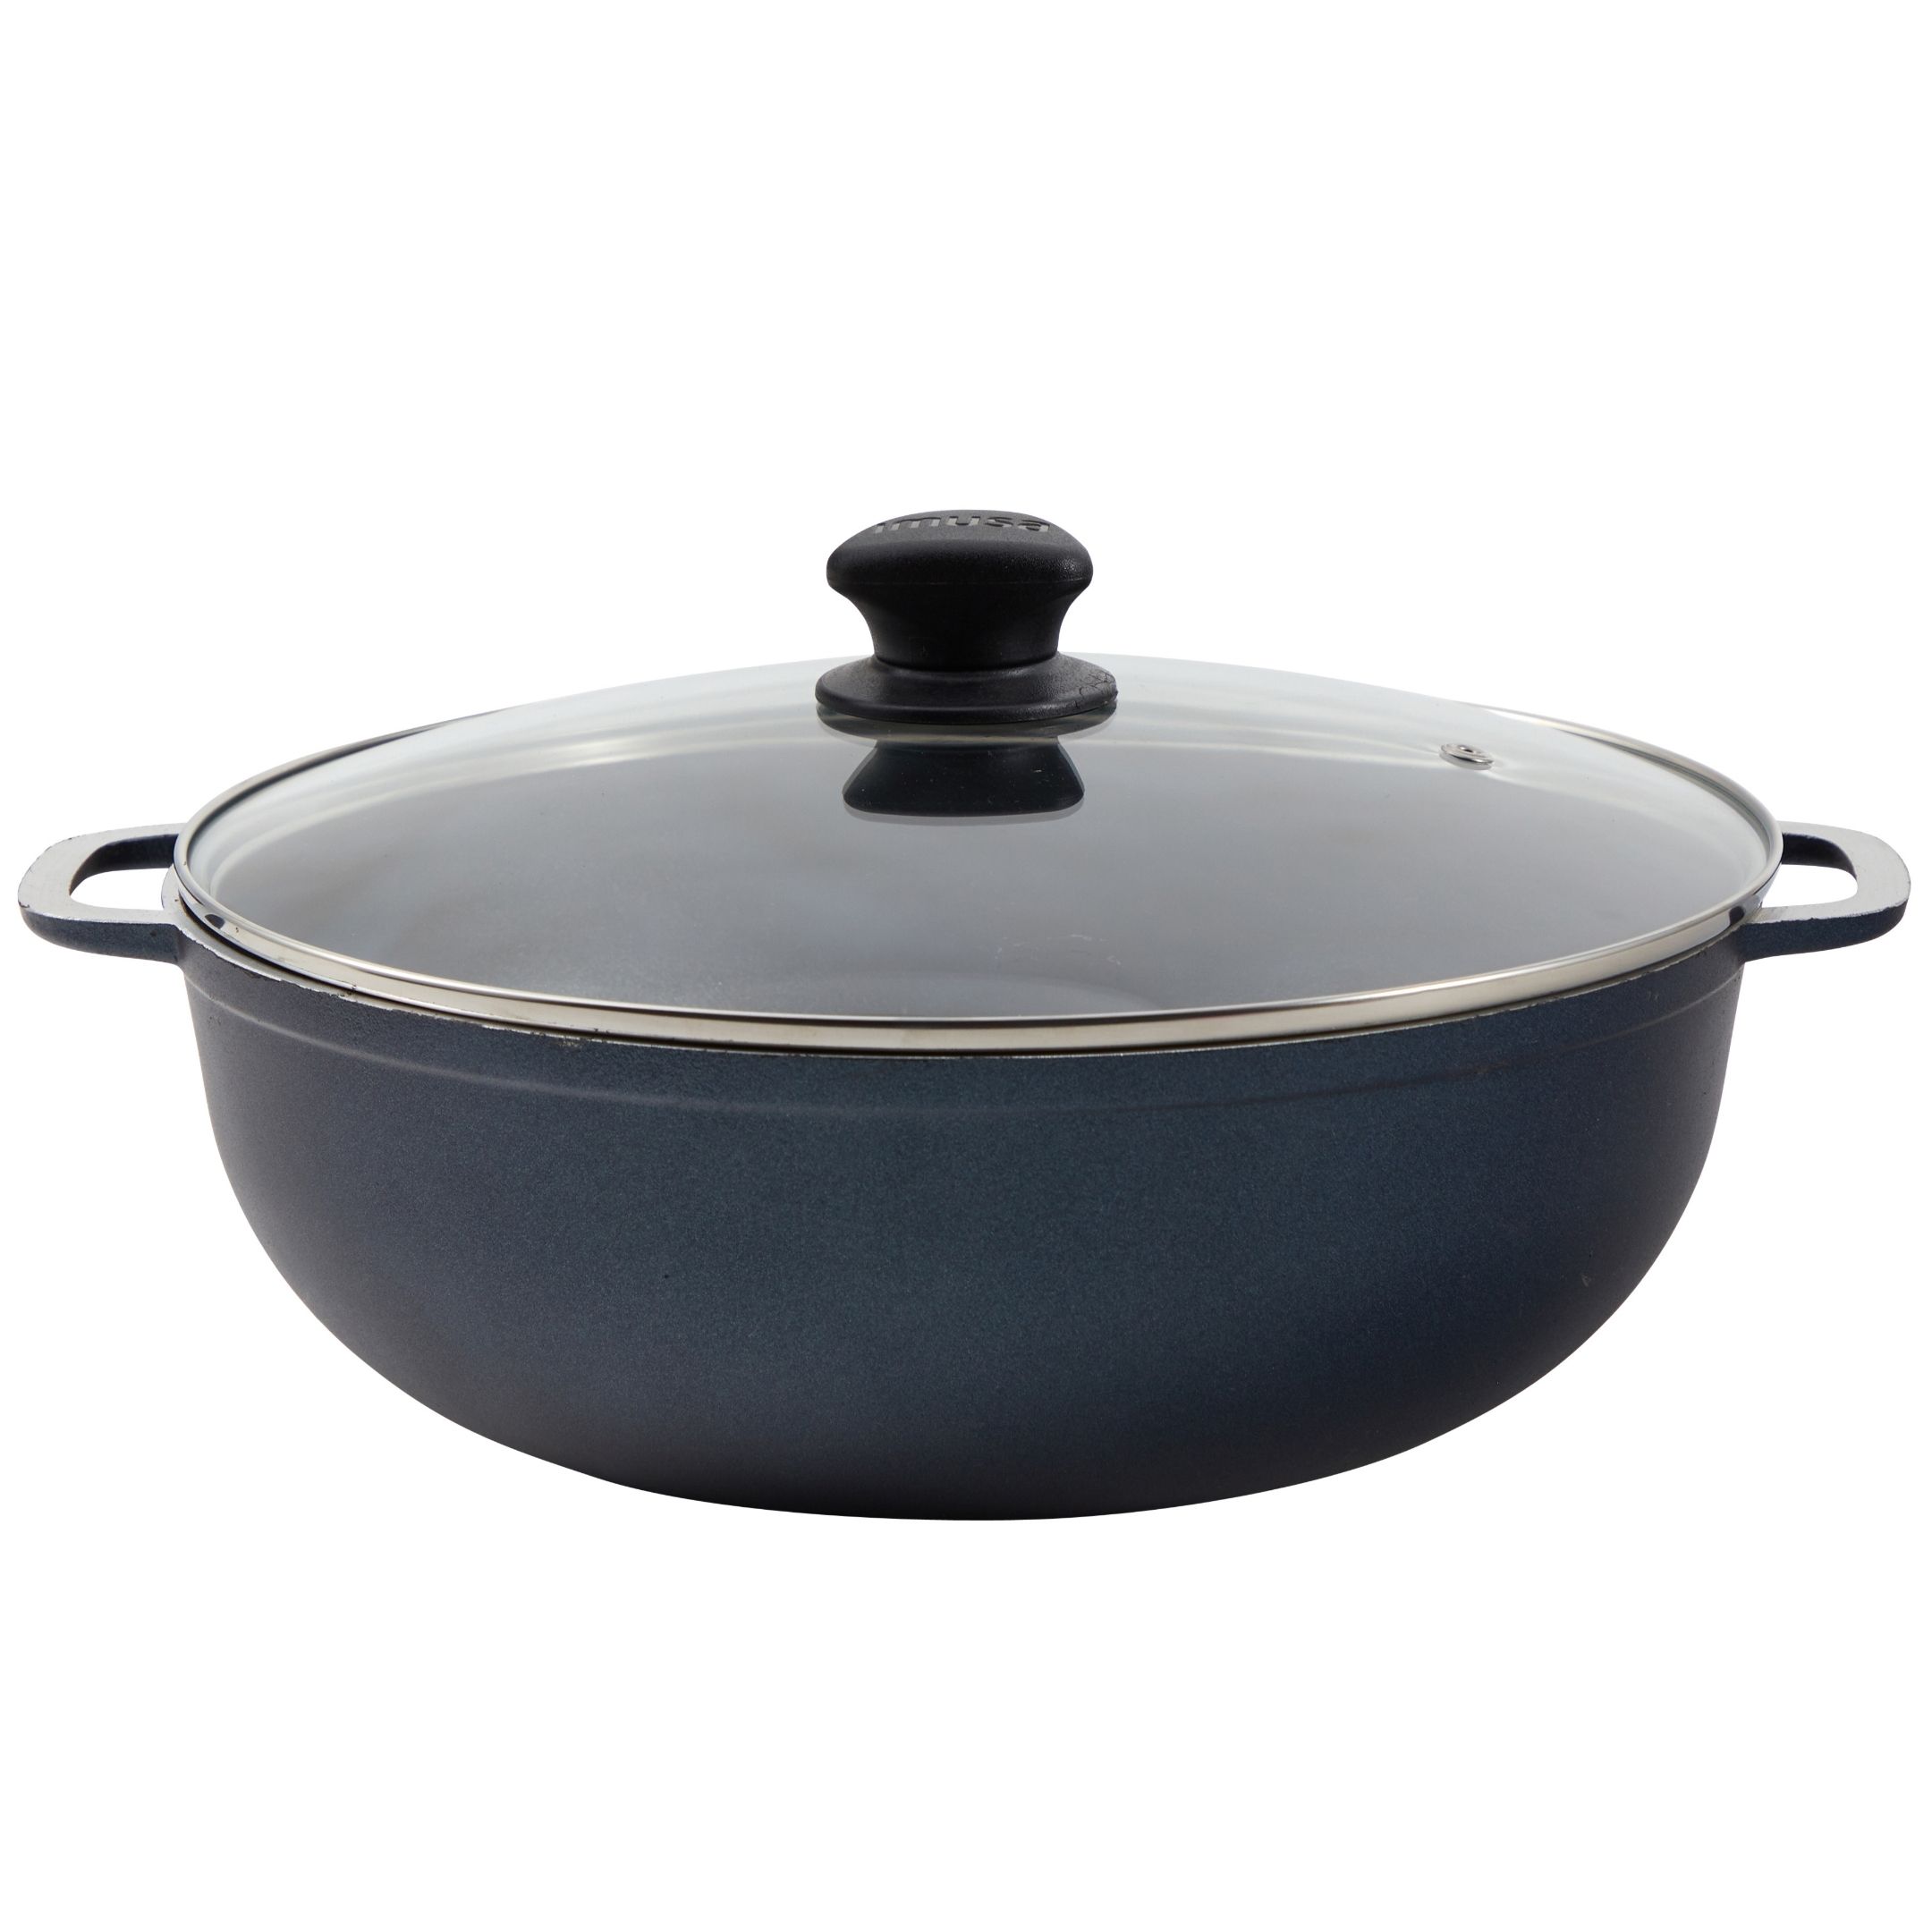 Imusa 3.7 Quart Aluminum Colombian Nonstick Caldero (Dutch Oven) with Glass Lid and Steam Vent - image 1 of 12